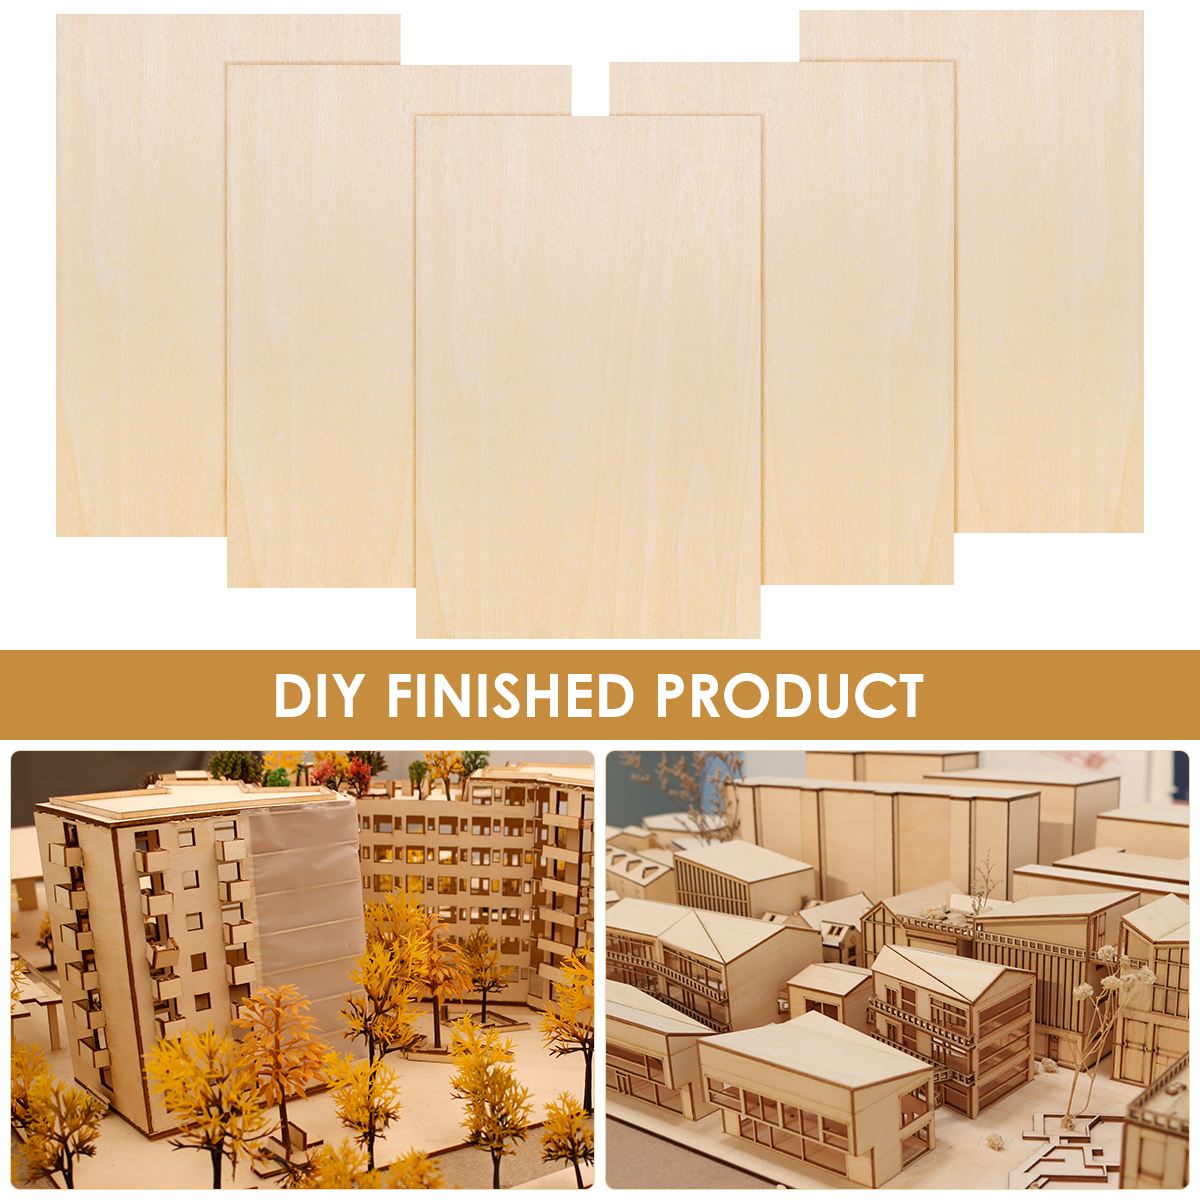 EXCEART 15PCS Basswood Craft Board Model Toys Building Carving Handicraft Educational DIY Accessories 150x100x3mm